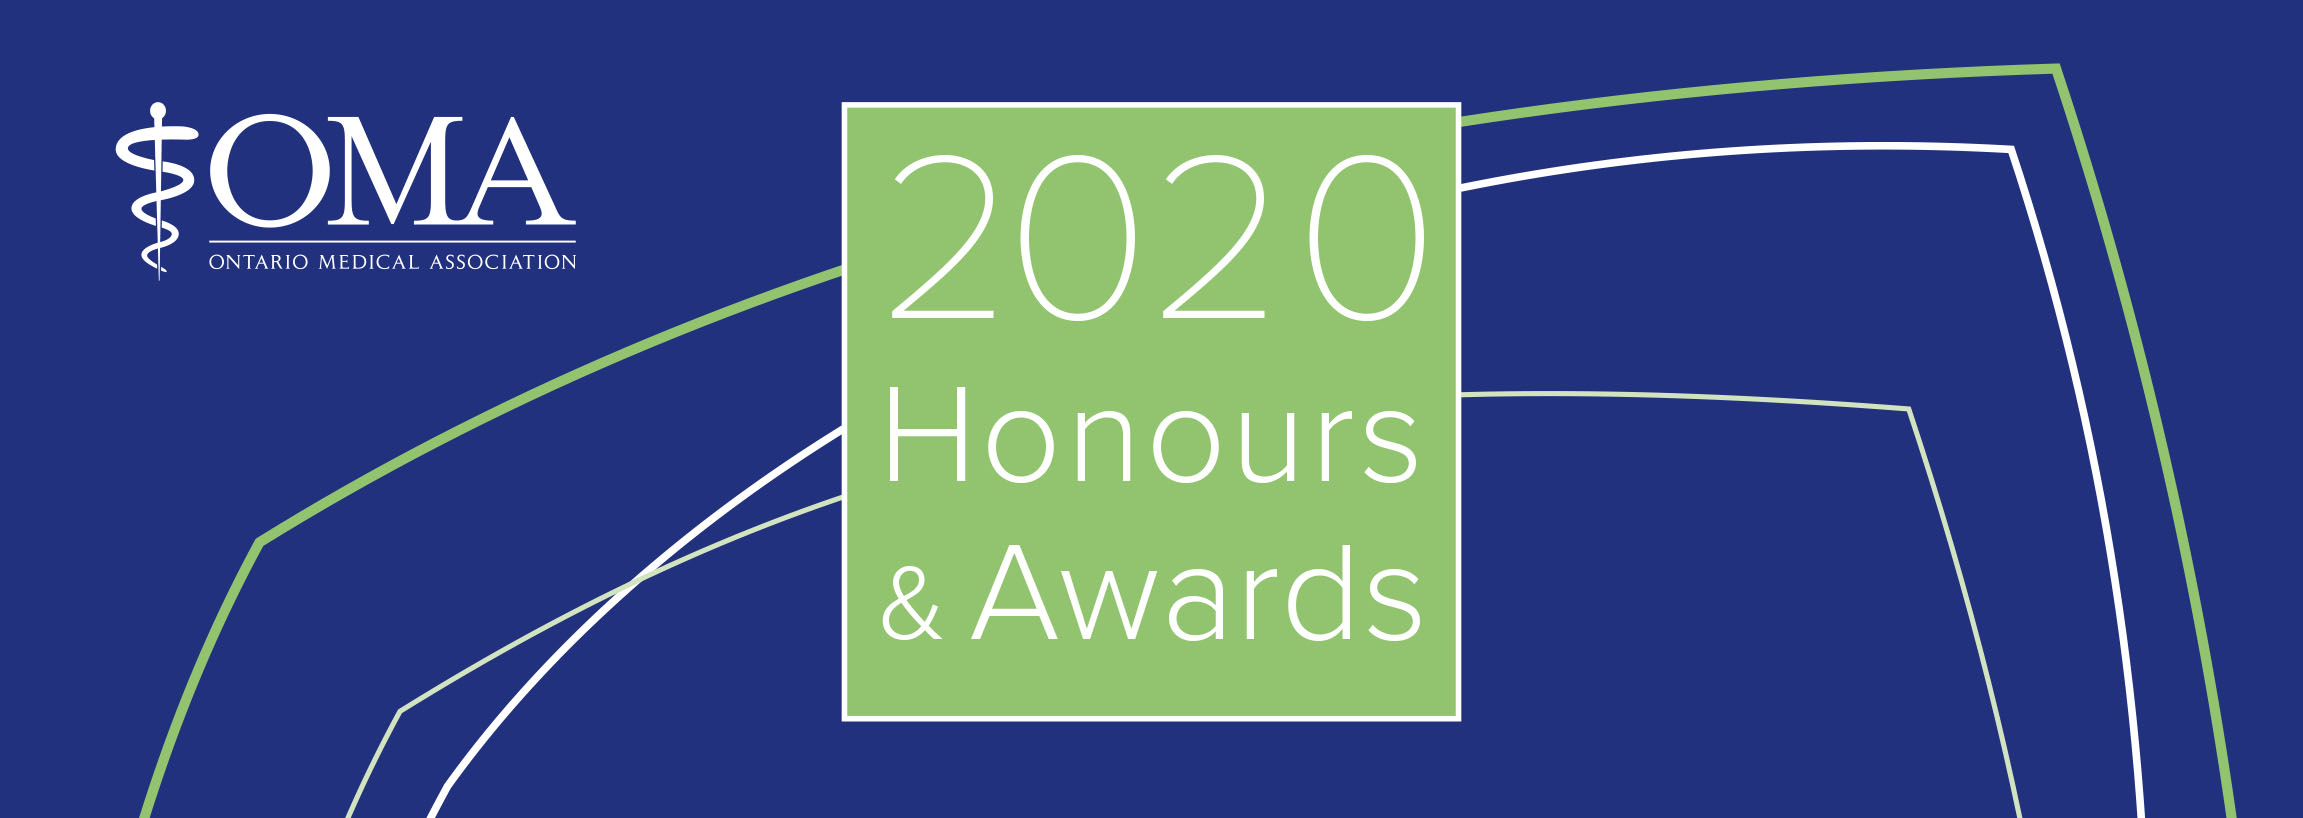 Ontario Medical Association 2020 Honours and Awards